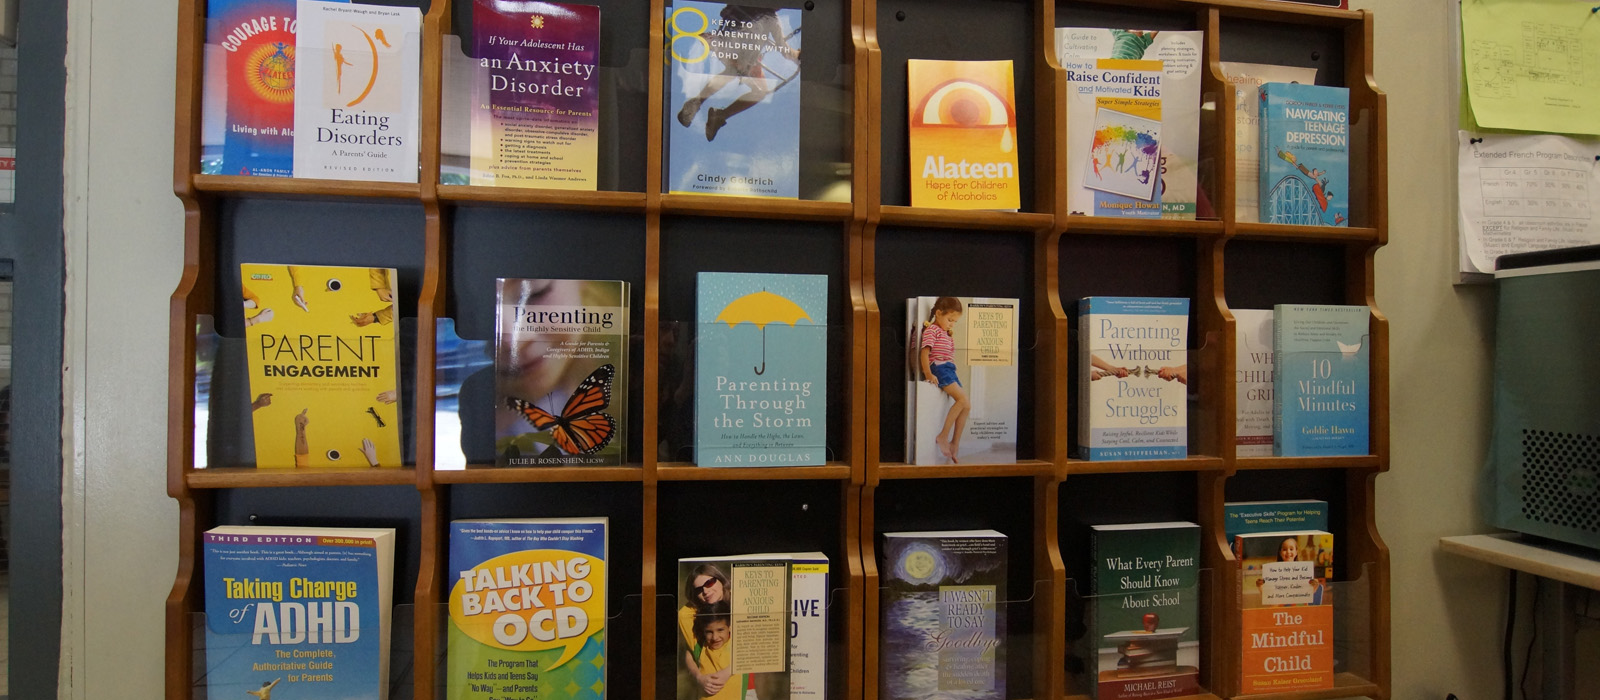 Various parent resource brochures on effective parenting in a variety of subjects.